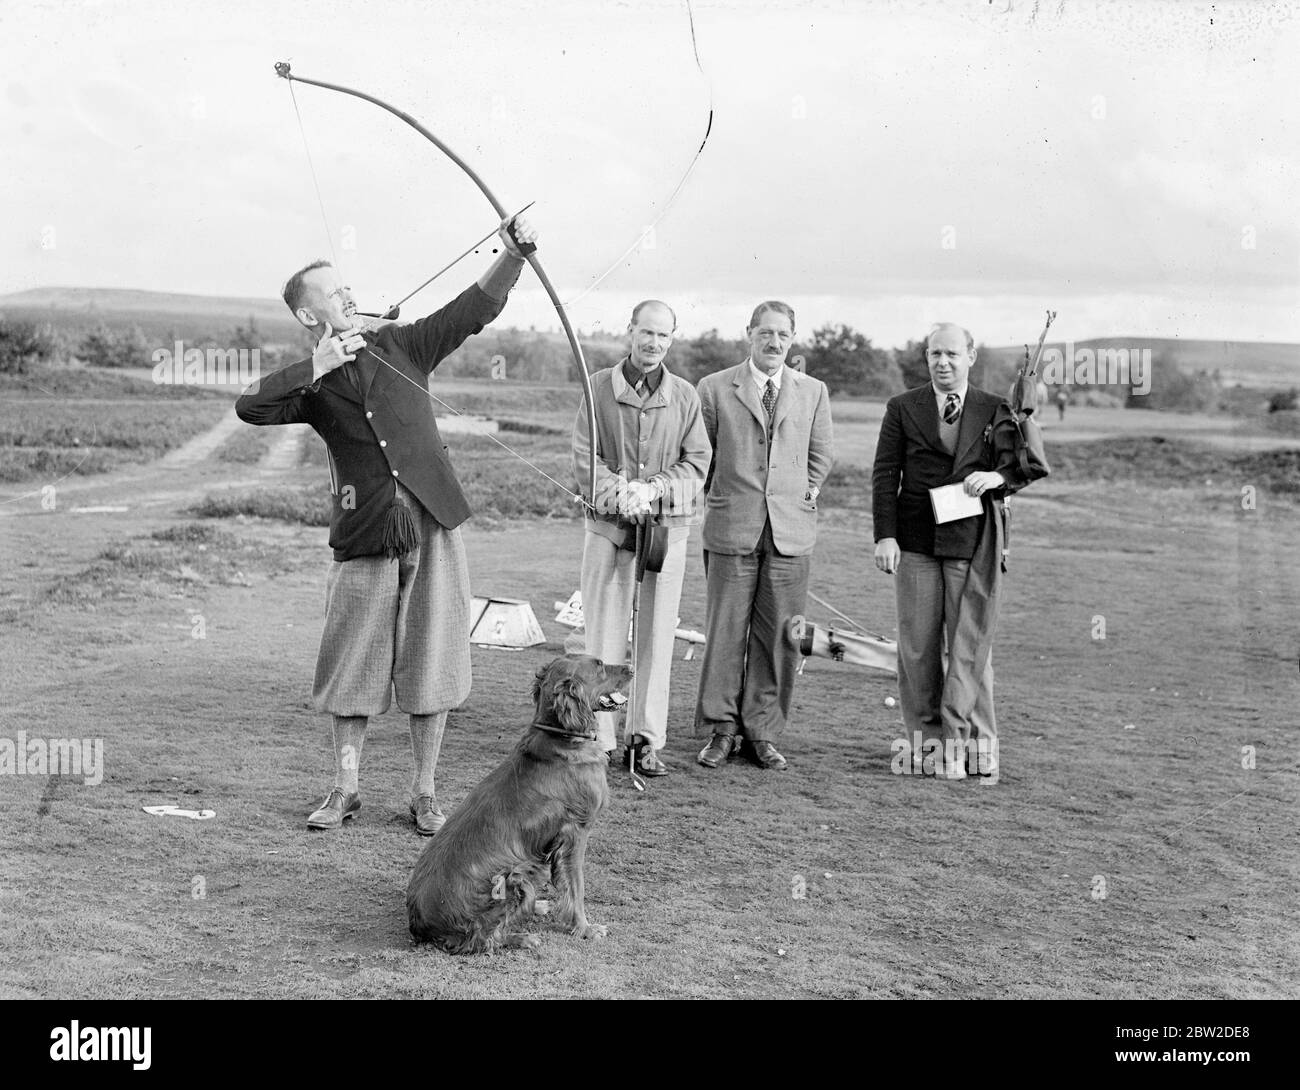 Playing with bow and arrow, Major J G Hayter, acknowledged expert at the annual sport of bow and arrow golf, met Colonel E St George Kirke, the captain of the club, in a match at the Hankley Common Golf Club, Surrey. He conceded a stroke a gale. Major Hayter shoots his arrow into a box instead of a hole. His average for most of the Surrey courses is in the seventies. Photo shows: Major J G Hayter shooting from the first tee while his pet Irish Settler dog Becky watches the flight of the arrow.. 18 October 1938 Stock Photo